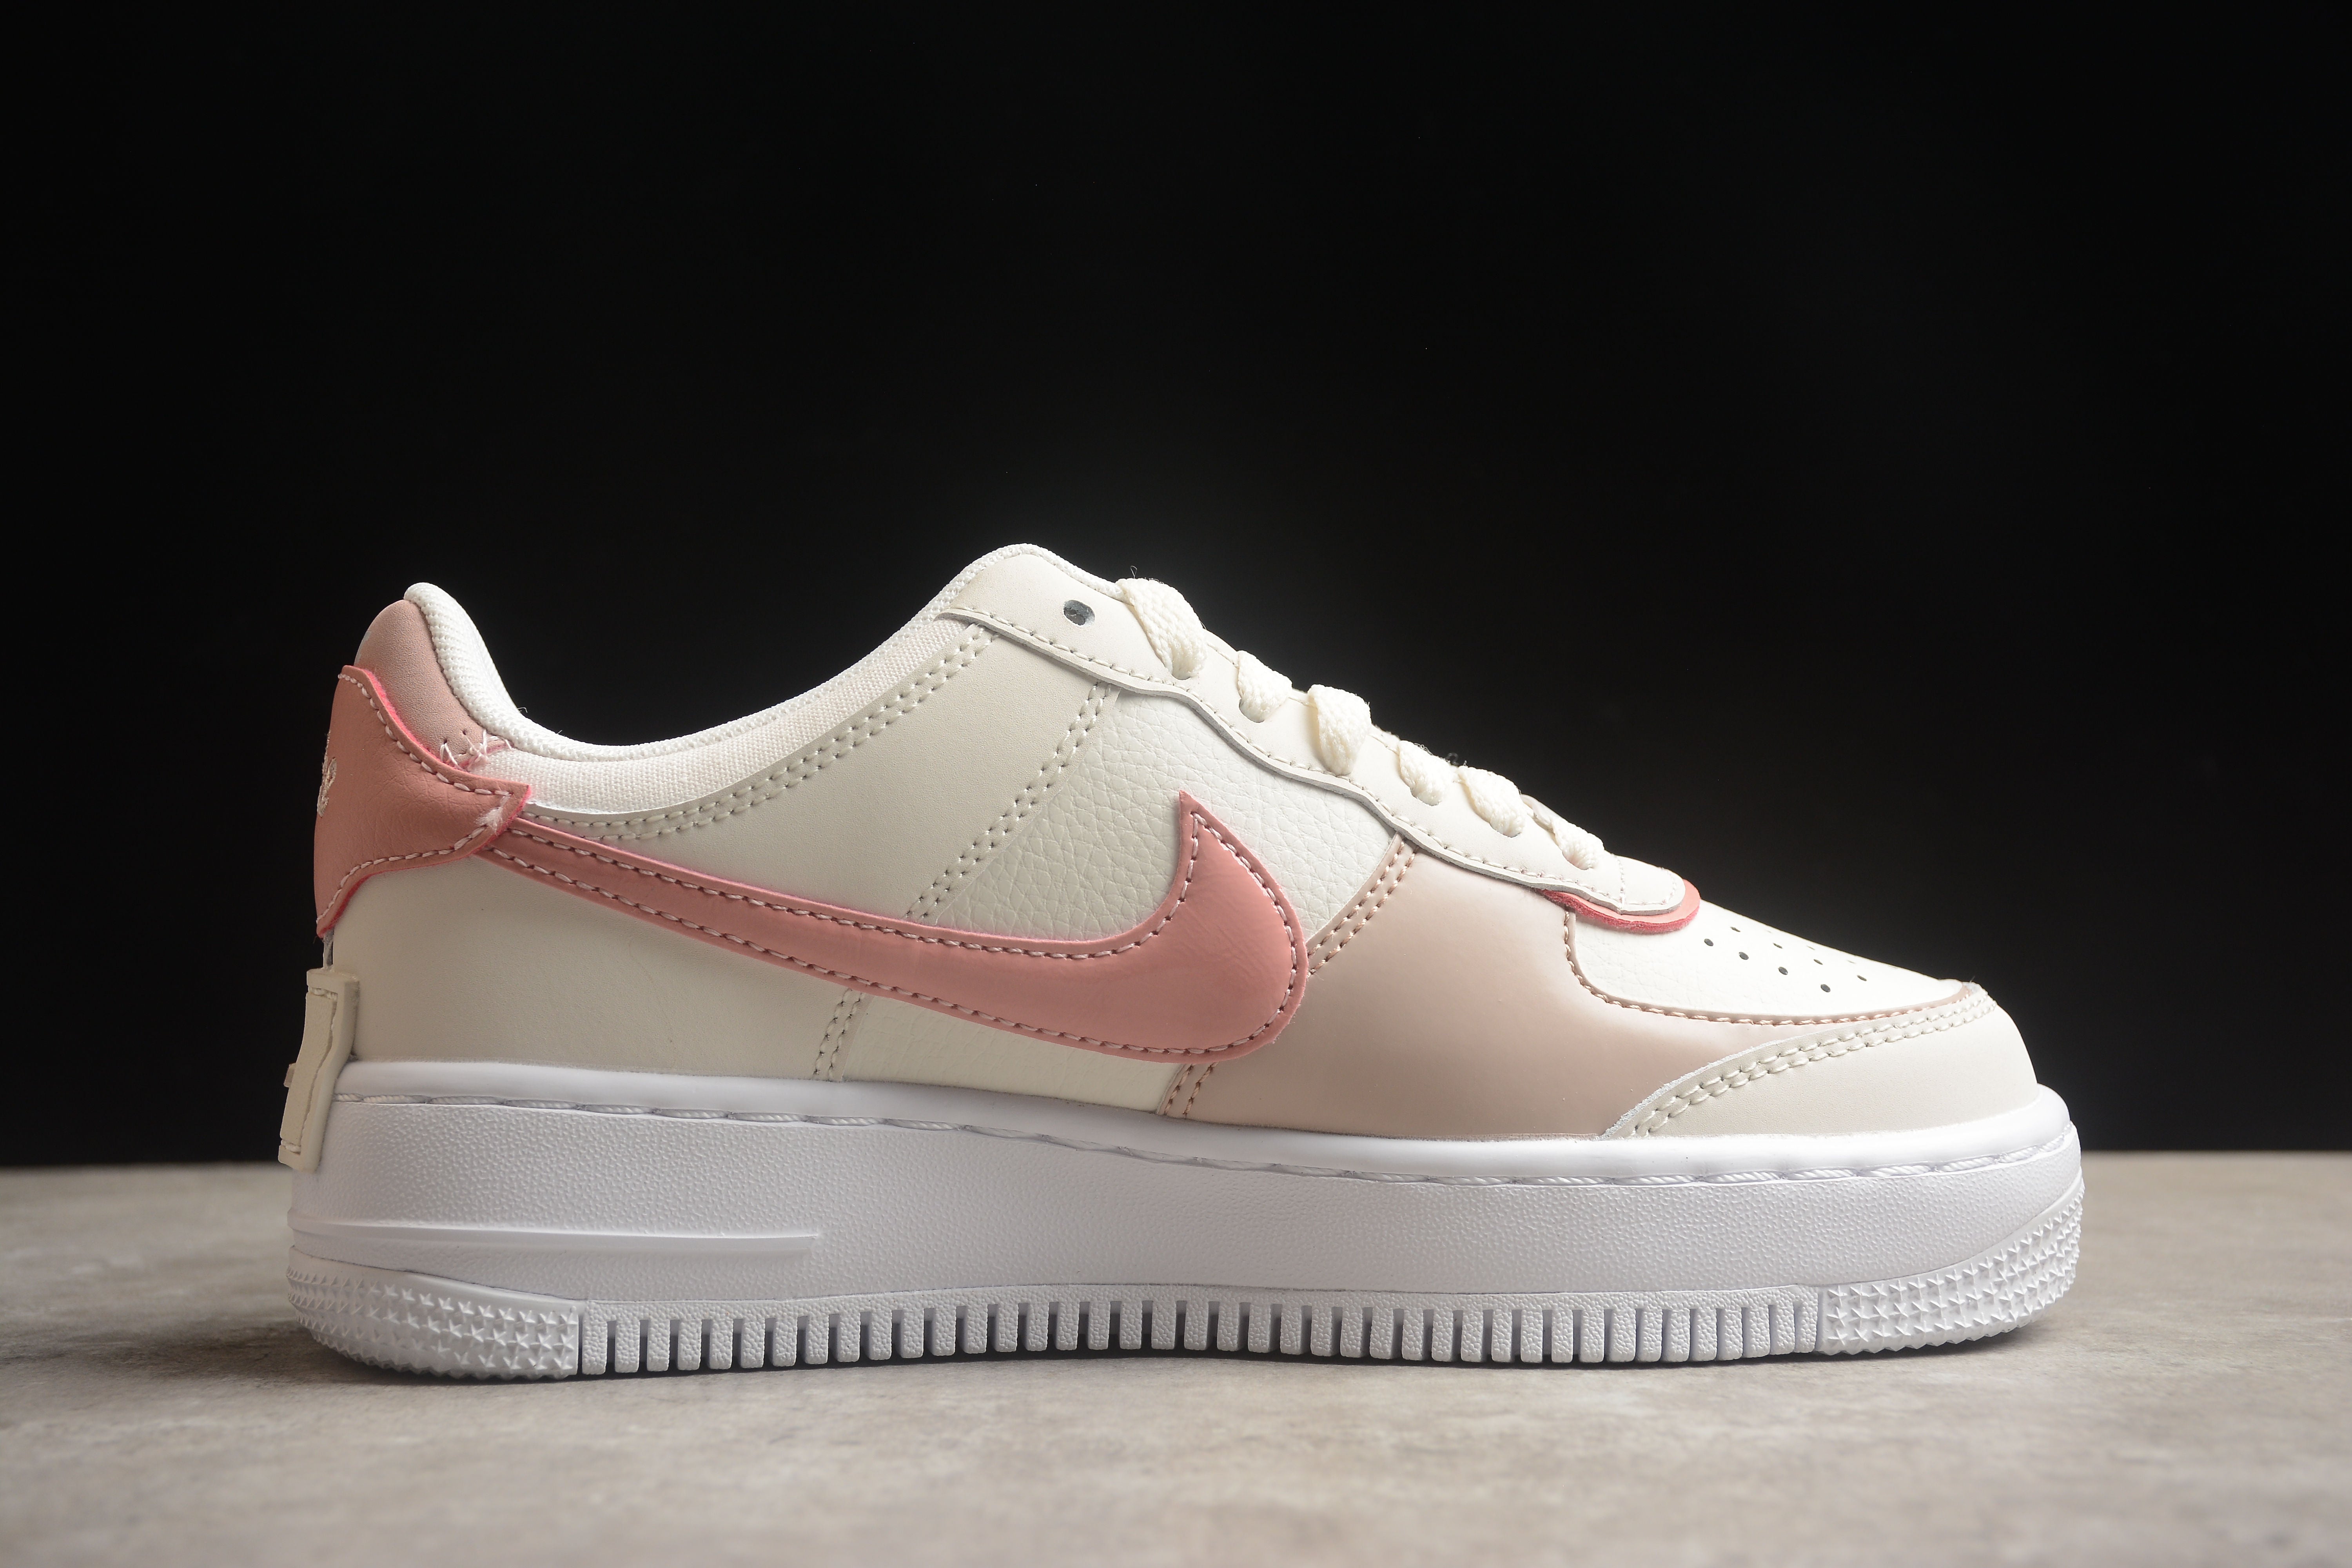 Nike airforce A1 nude shoes